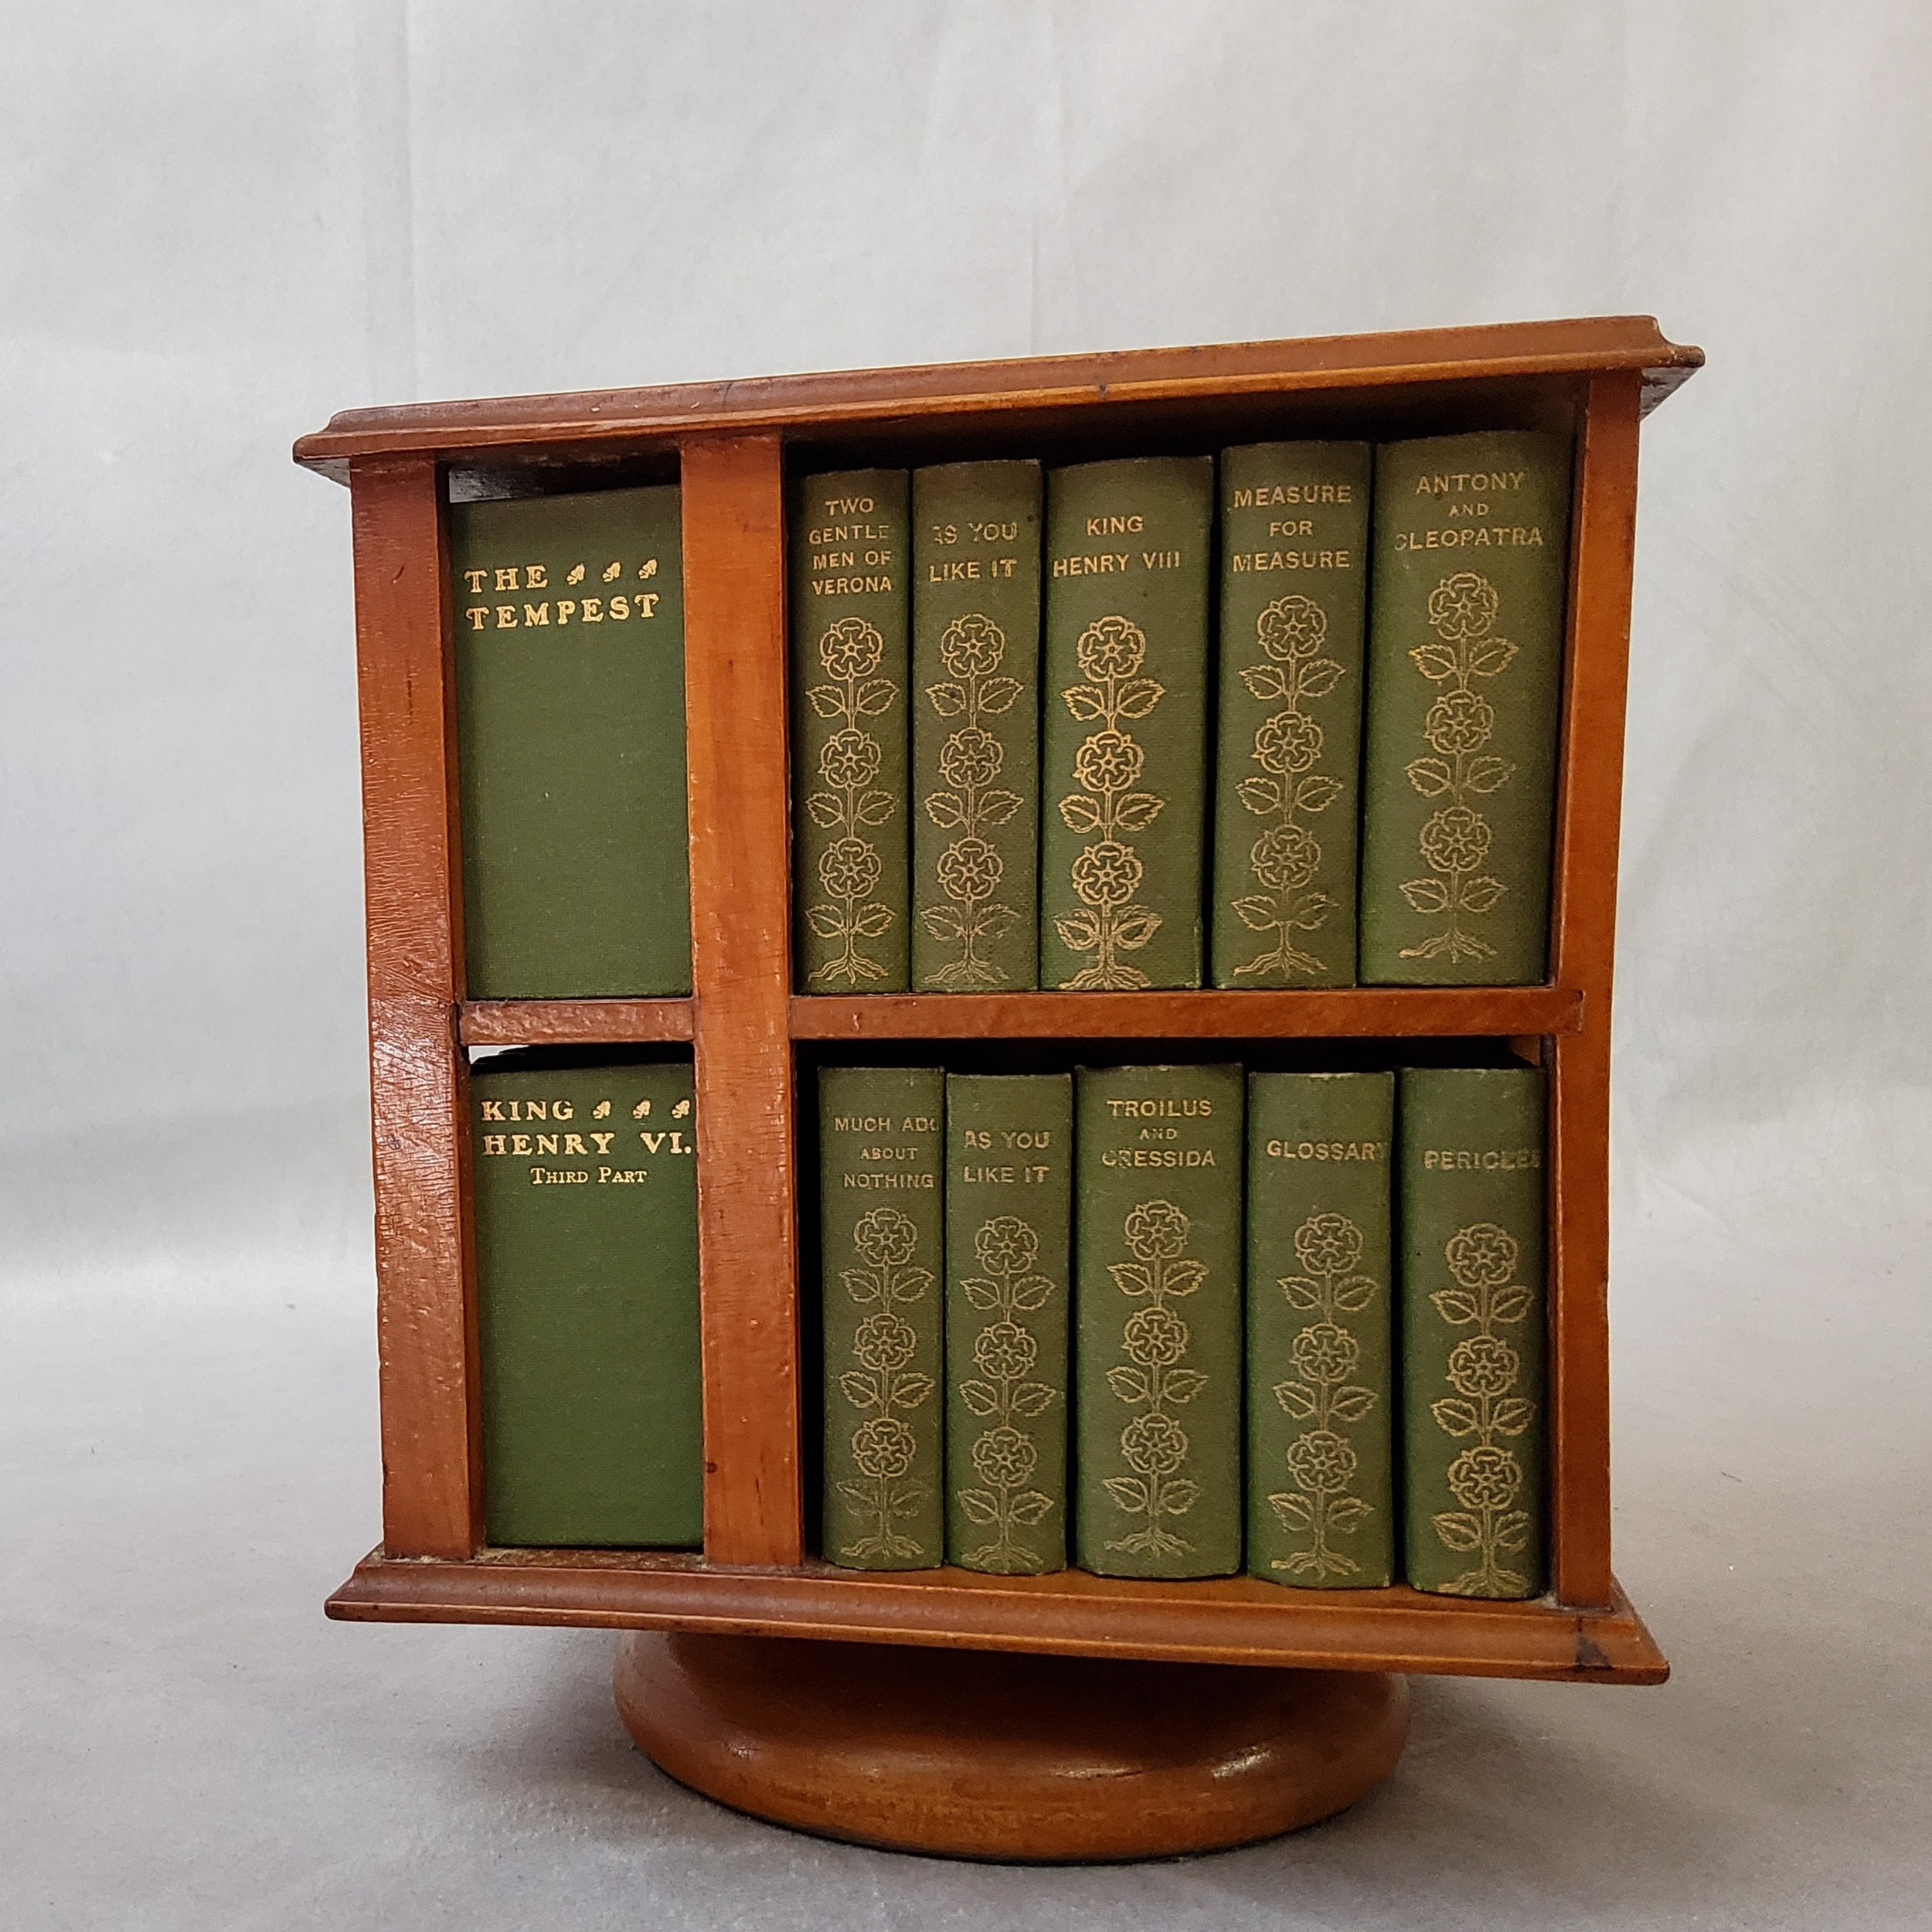 A 19th-century revolving miniature bookcase, containing miniature editions of the work of William - Image 4 of 6